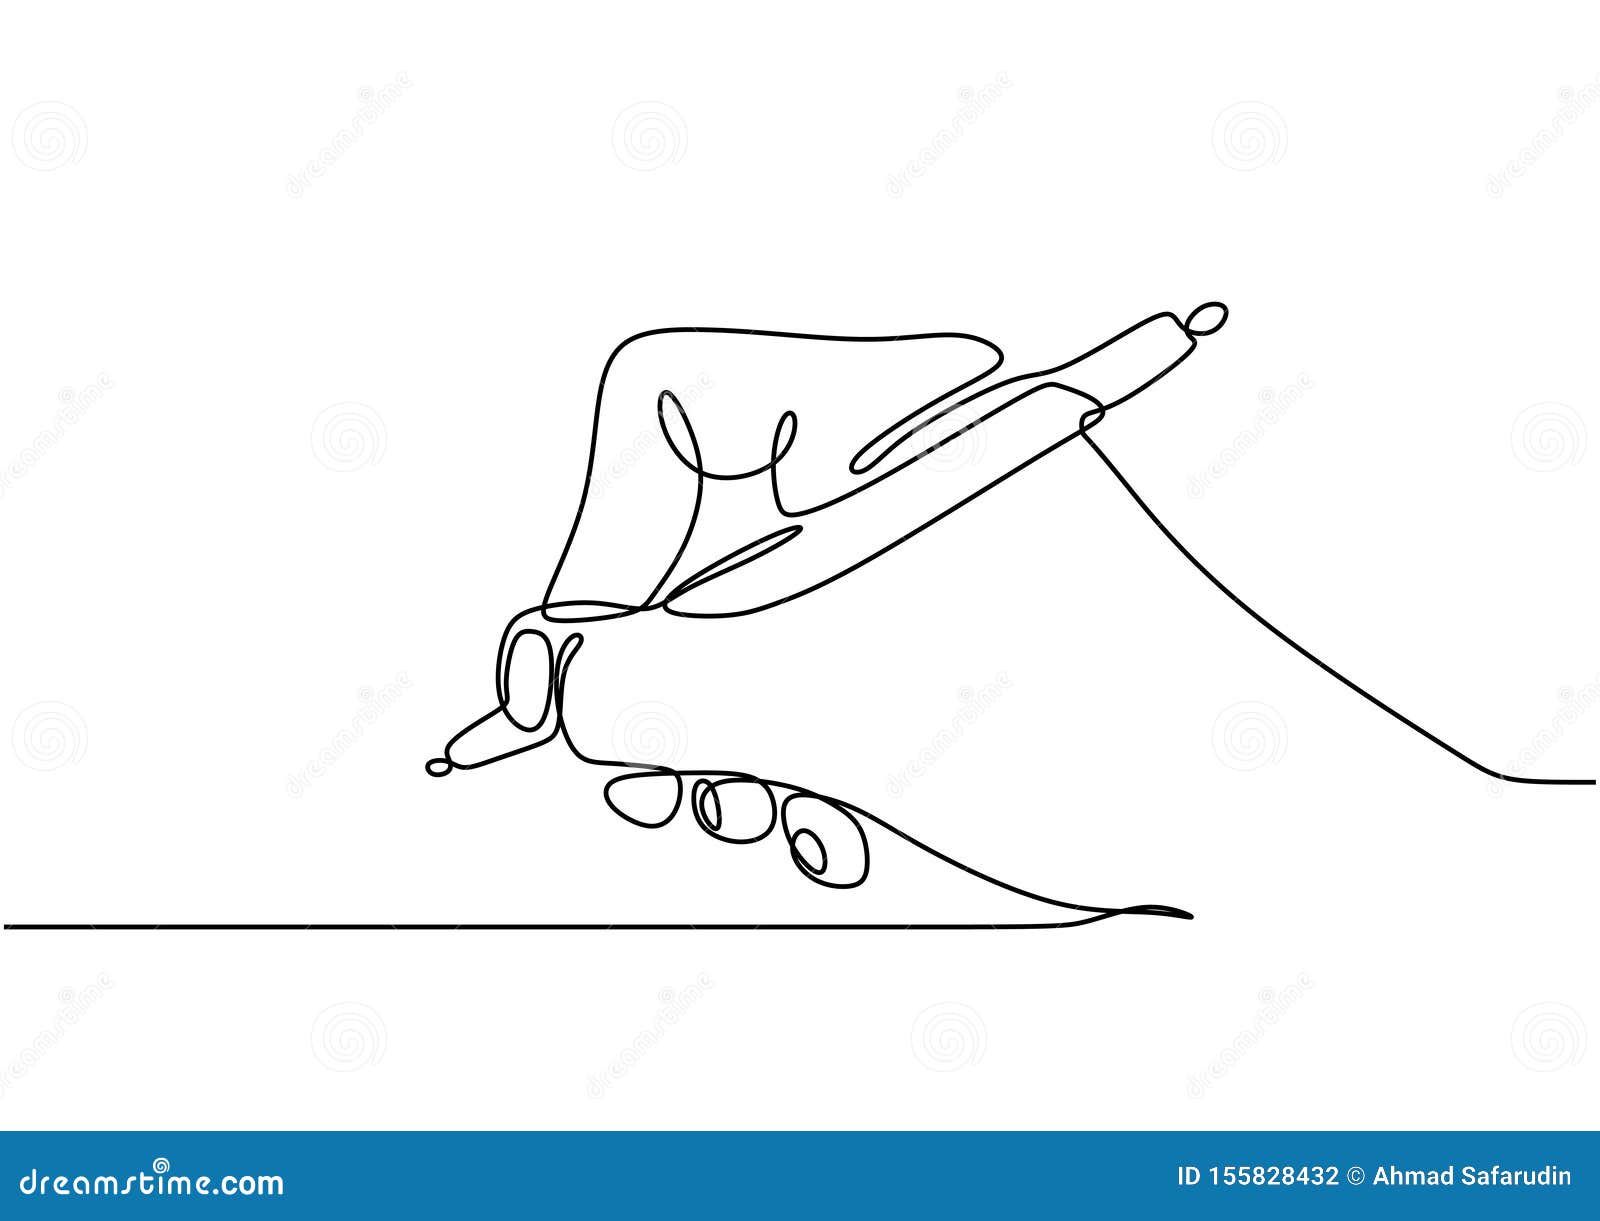 continuous one line drawing of hand writing with an ink pen minimalism 